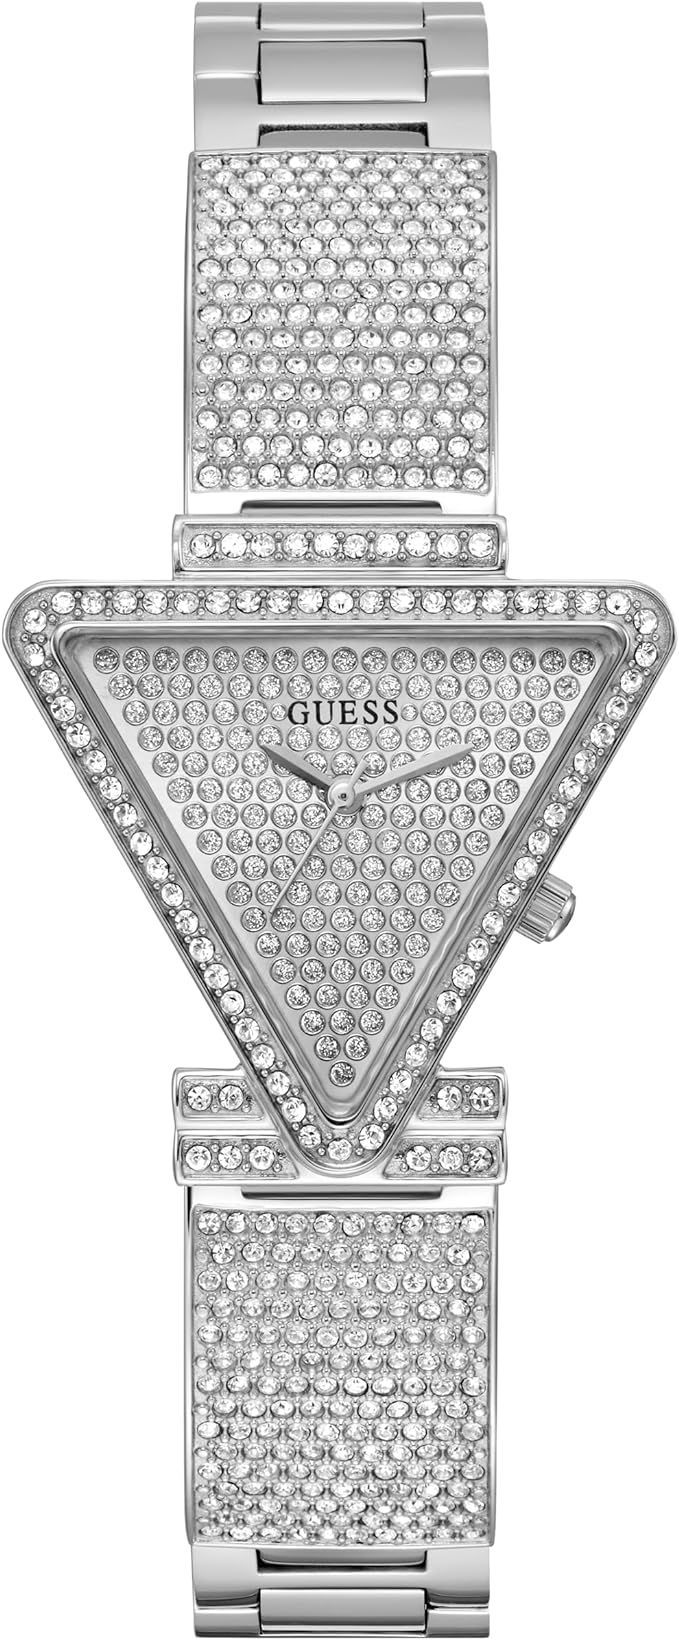 GUESS Ladies 34mm Watch - Black Strap Champagne Dial Gold Tone Case | Amazon (US)